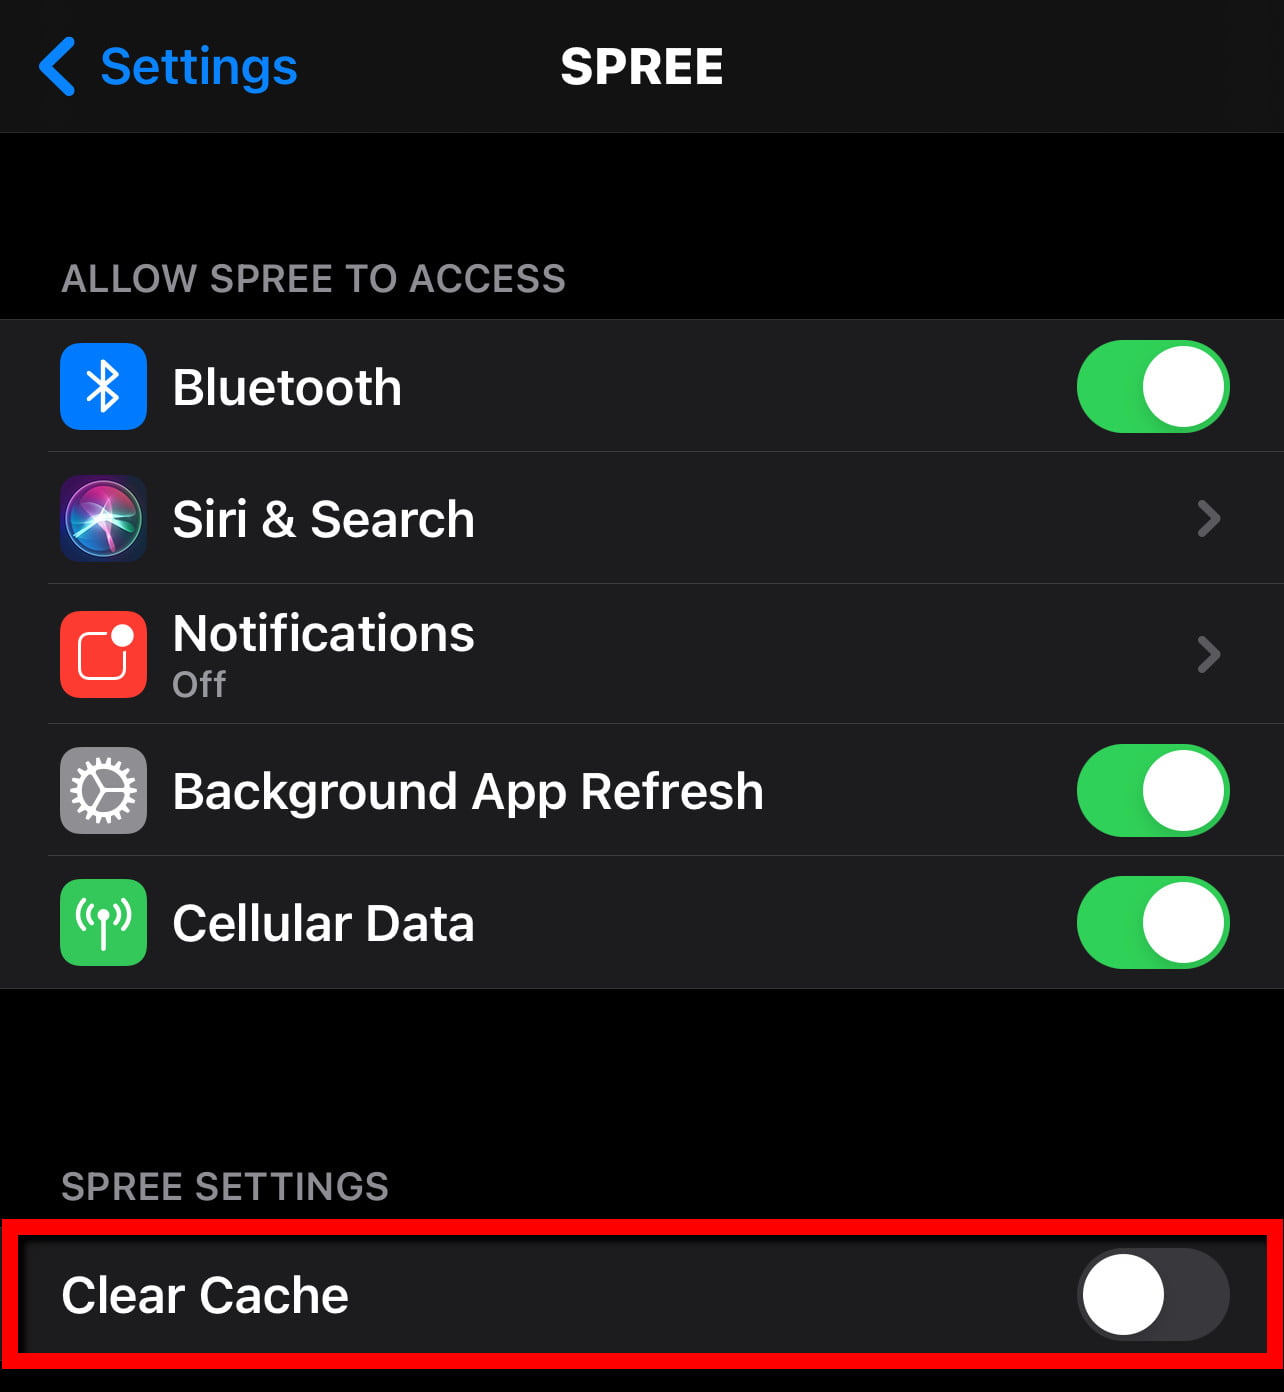 Restart the device to clear the iPhone cache